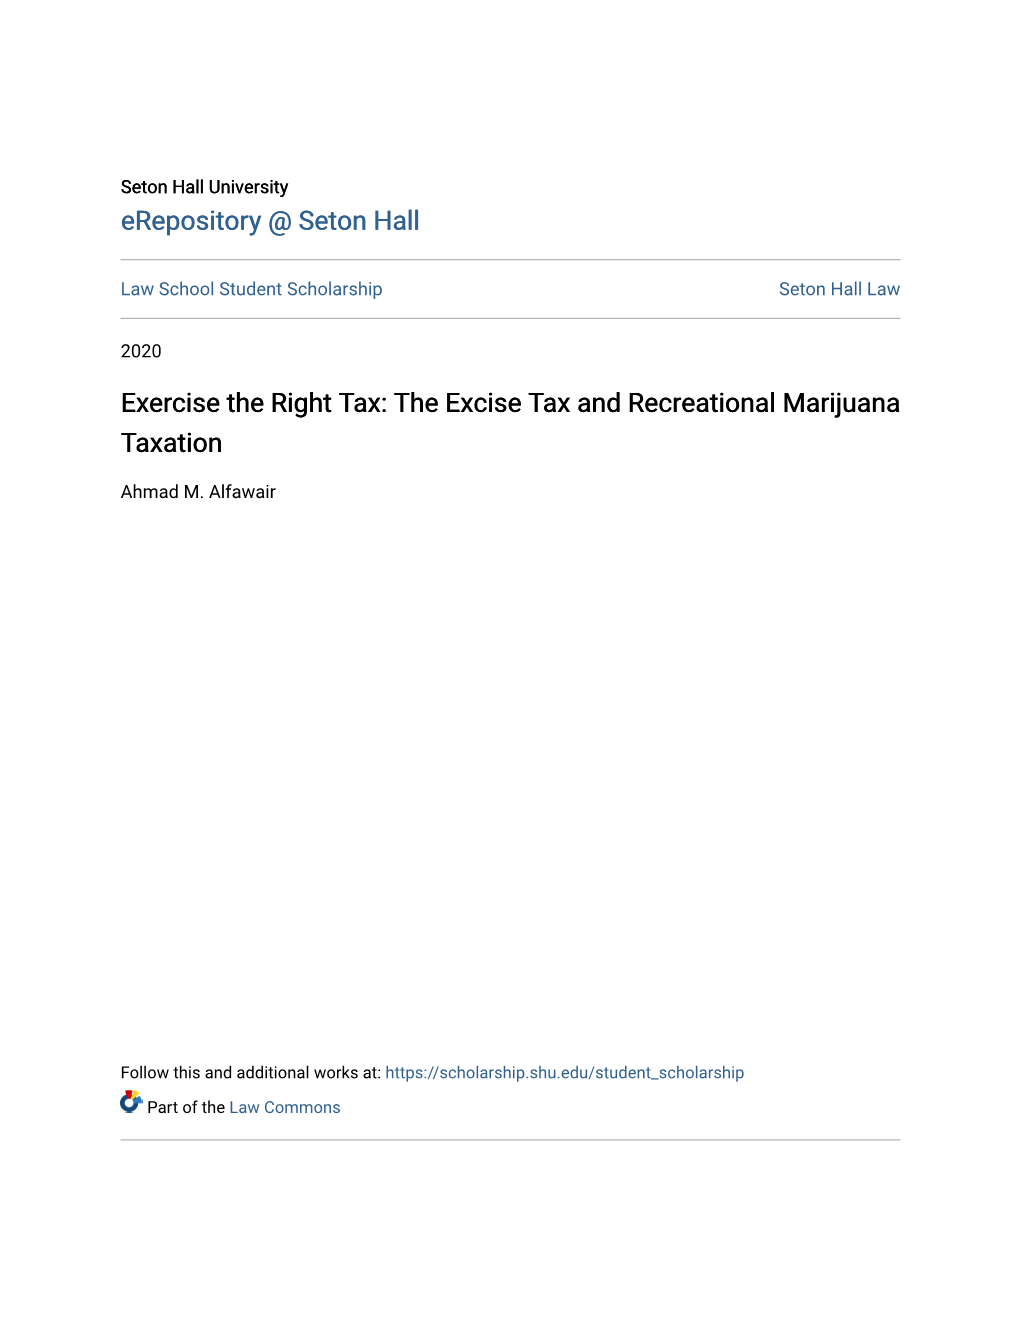 Exercise the Right Tax: the Excise Tax and Recreational Marijuana Taxation